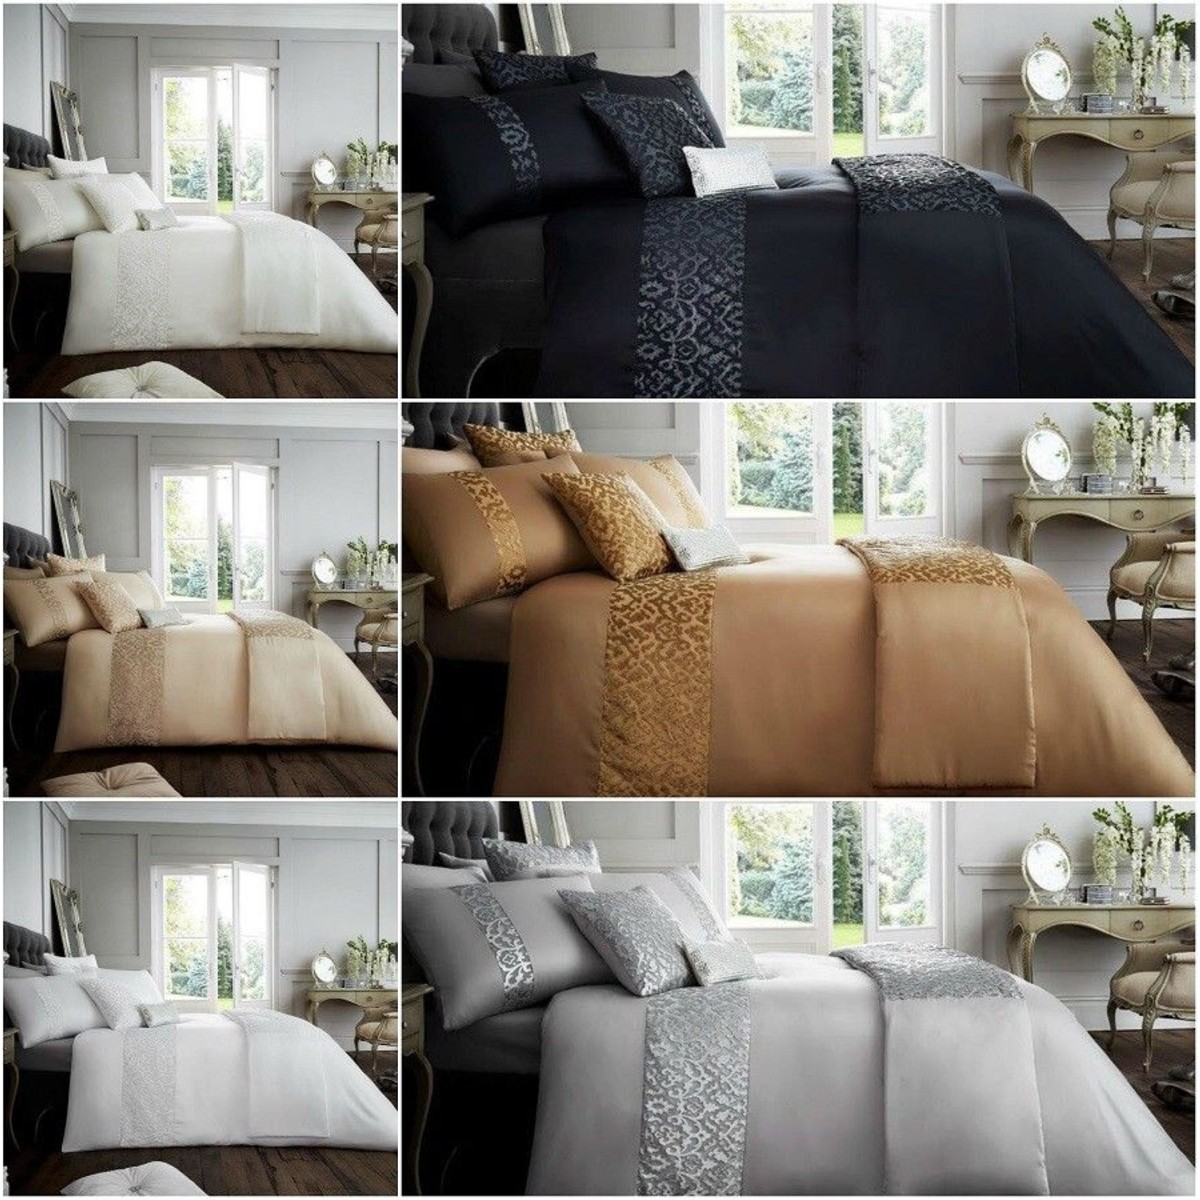 Venice Embroided Patterned Fancy Duvet Quilt Cover Luxury Bedding